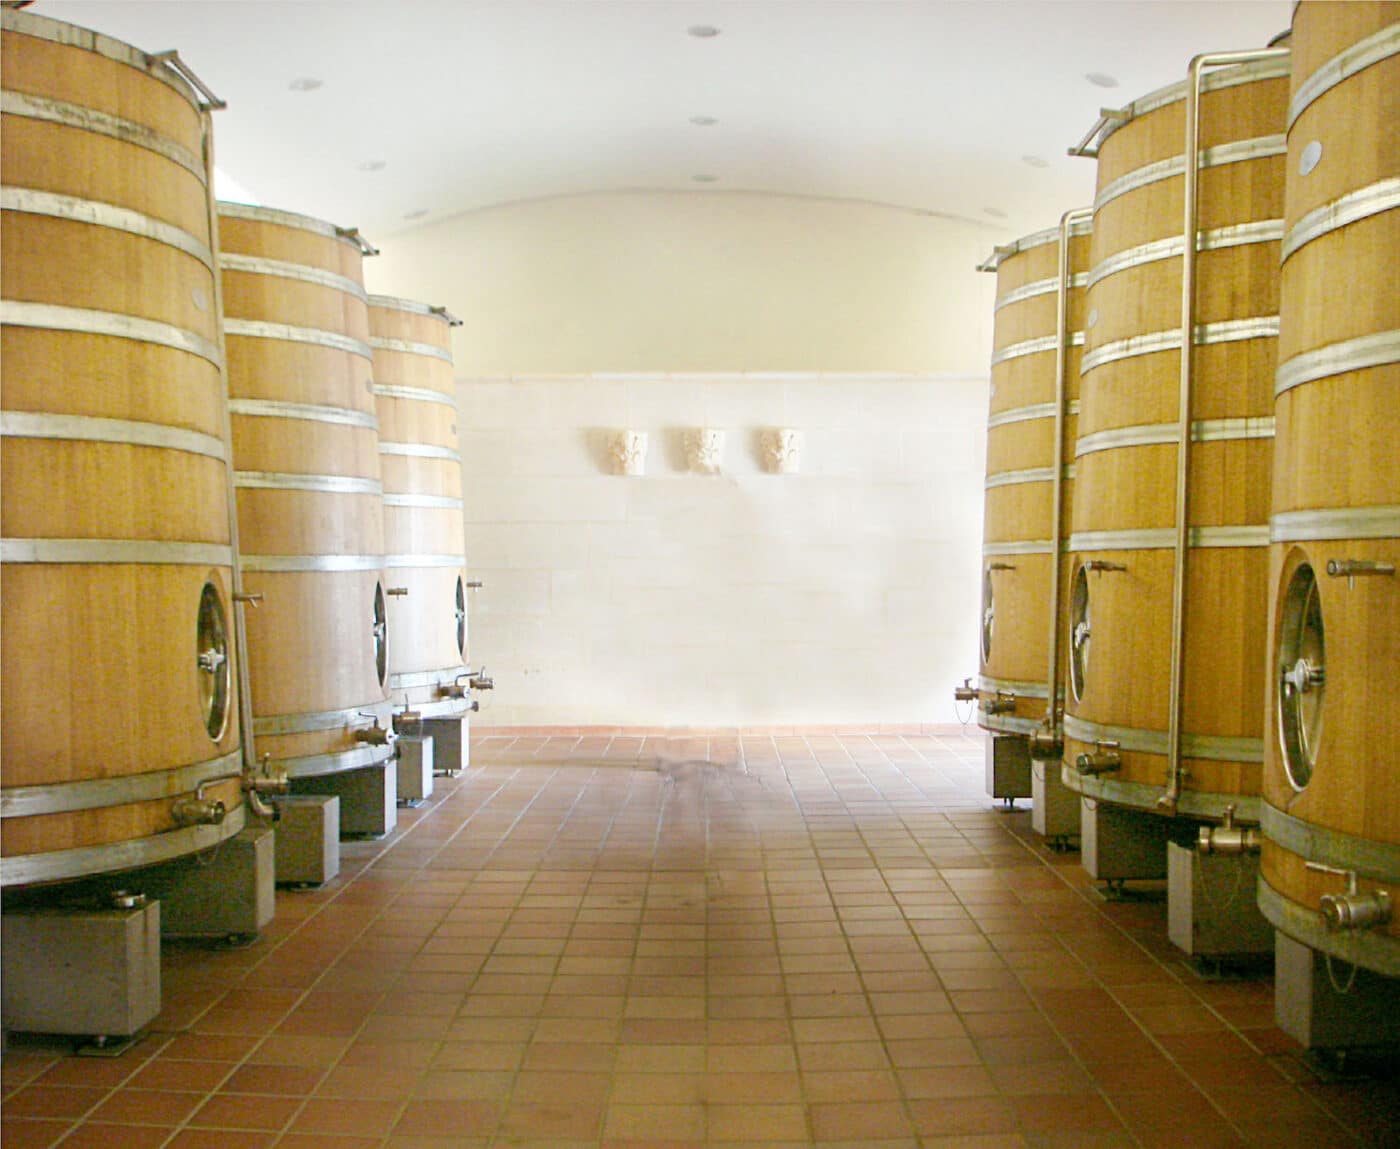 8 Essential Steps to the Winemakers’ Season: Part 2